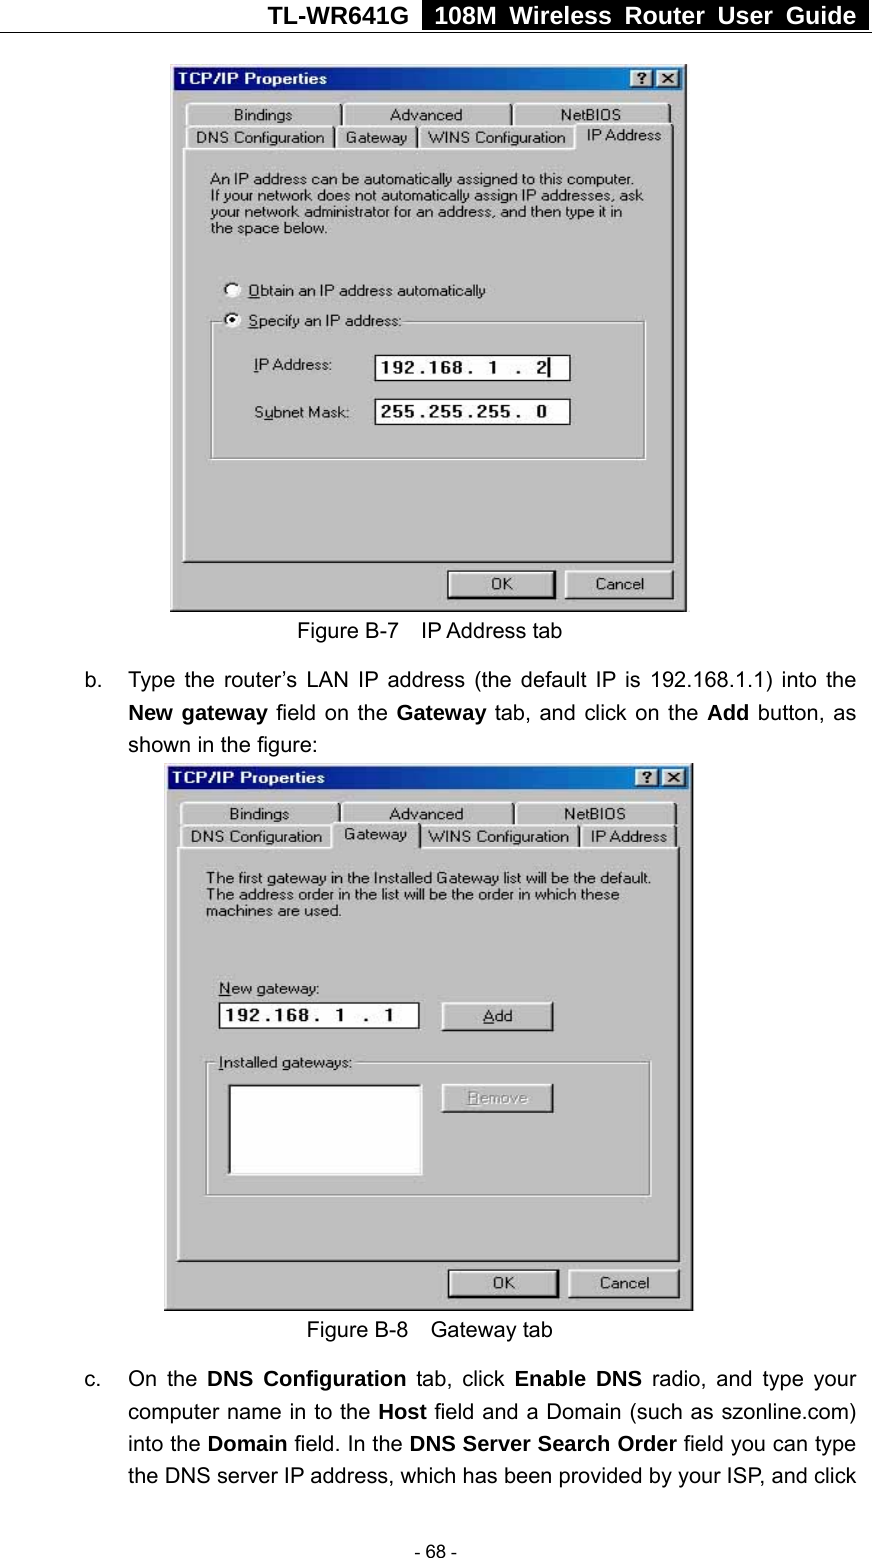 TL-WR641G   108M Wireless Router User Guide   Figure B-7  IP Address tab b.  Type the router’s LAN IP address (the default IP is 192.168.1.1) into the New gateway field on the Gateway tab, and click on the Add button, as shown in the figure:    Figure B-8  Gateway tab c. On the DNS Configuration tab, click Enable DNS radio, and type your computer name in to the Host field and a Domain (such as szonline.com) into the Domain field. In the DNS Server Search Order field you can type the DNS server IP address, which has been provided by your ISP, and click  - 68 - 